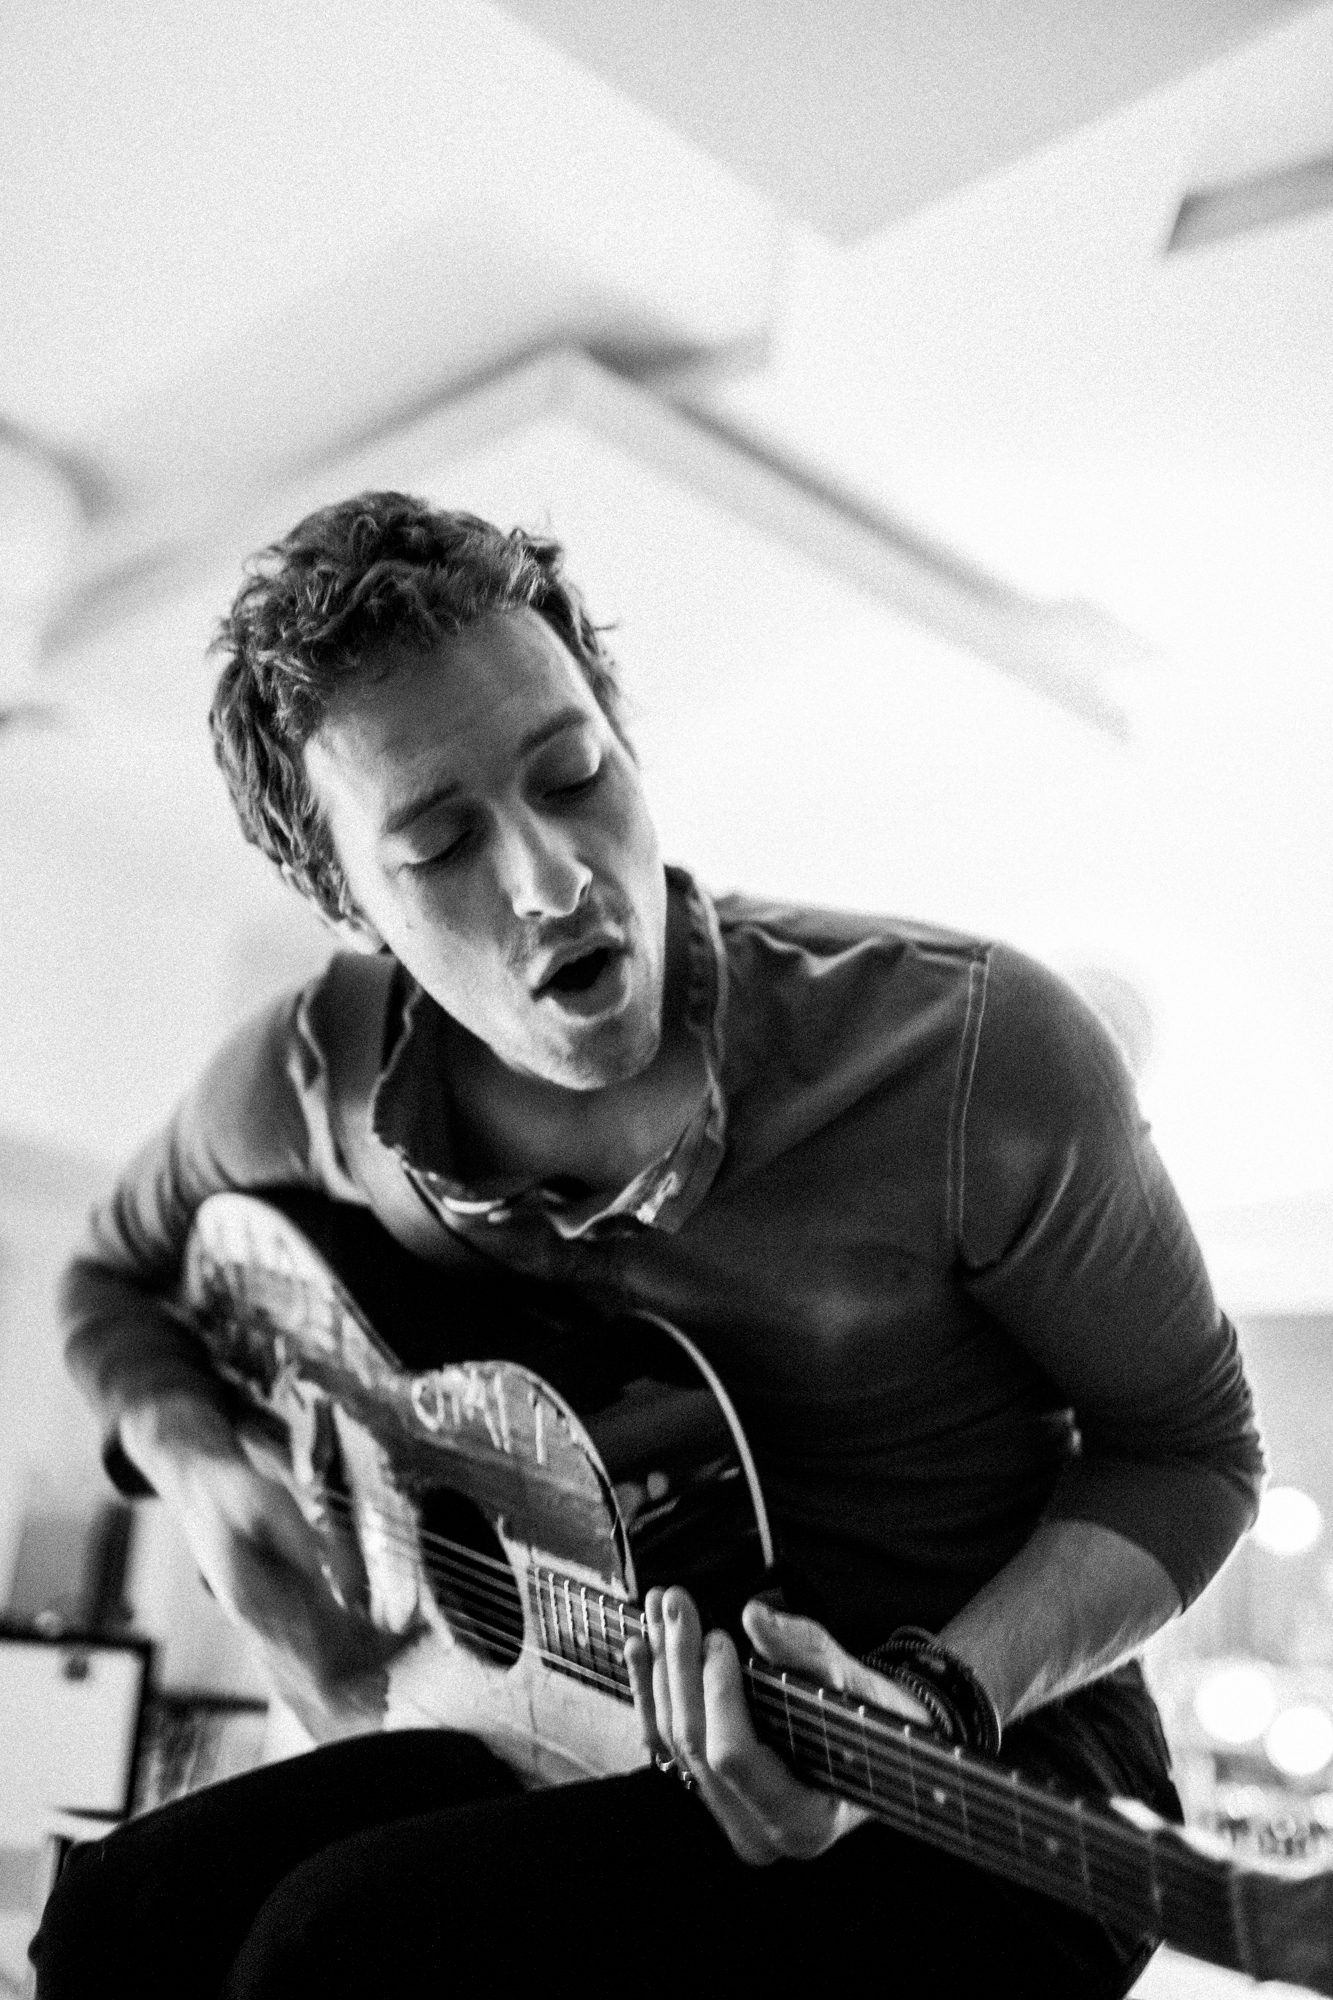 Chris Martin from Coldplay shot no ILFORD HP5+ black and white film by ©Guy Berryman